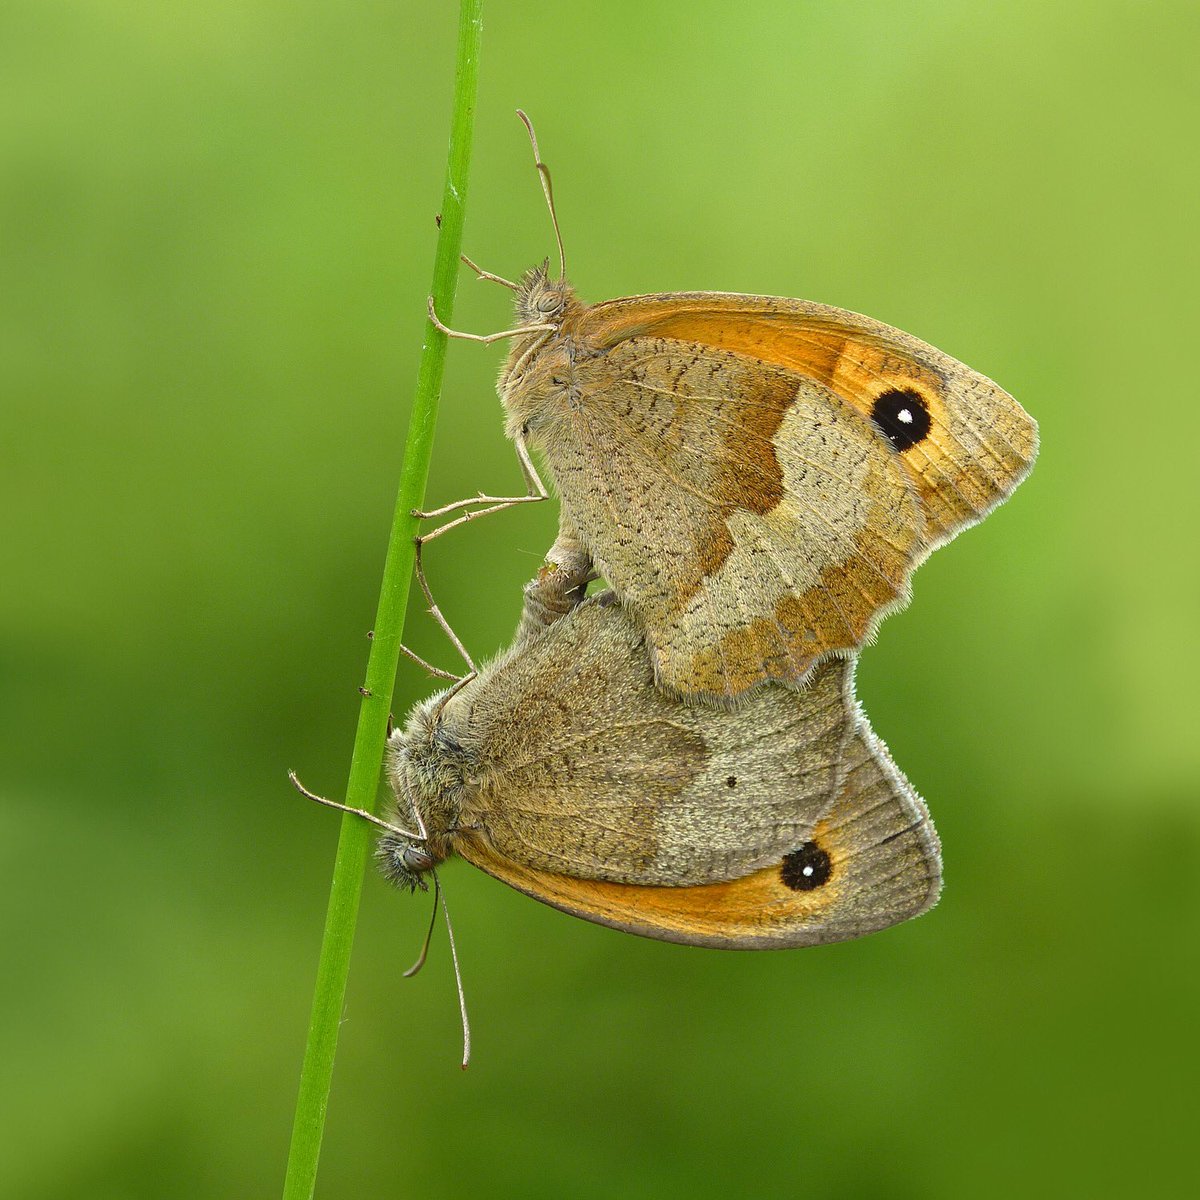 The increase in butterfly abundance in gardens with long grass was driven by butterfly species whose caterpillars feed on grasses, suggesting that leaving grass to grow is creating potential breeding habitat for butterflies